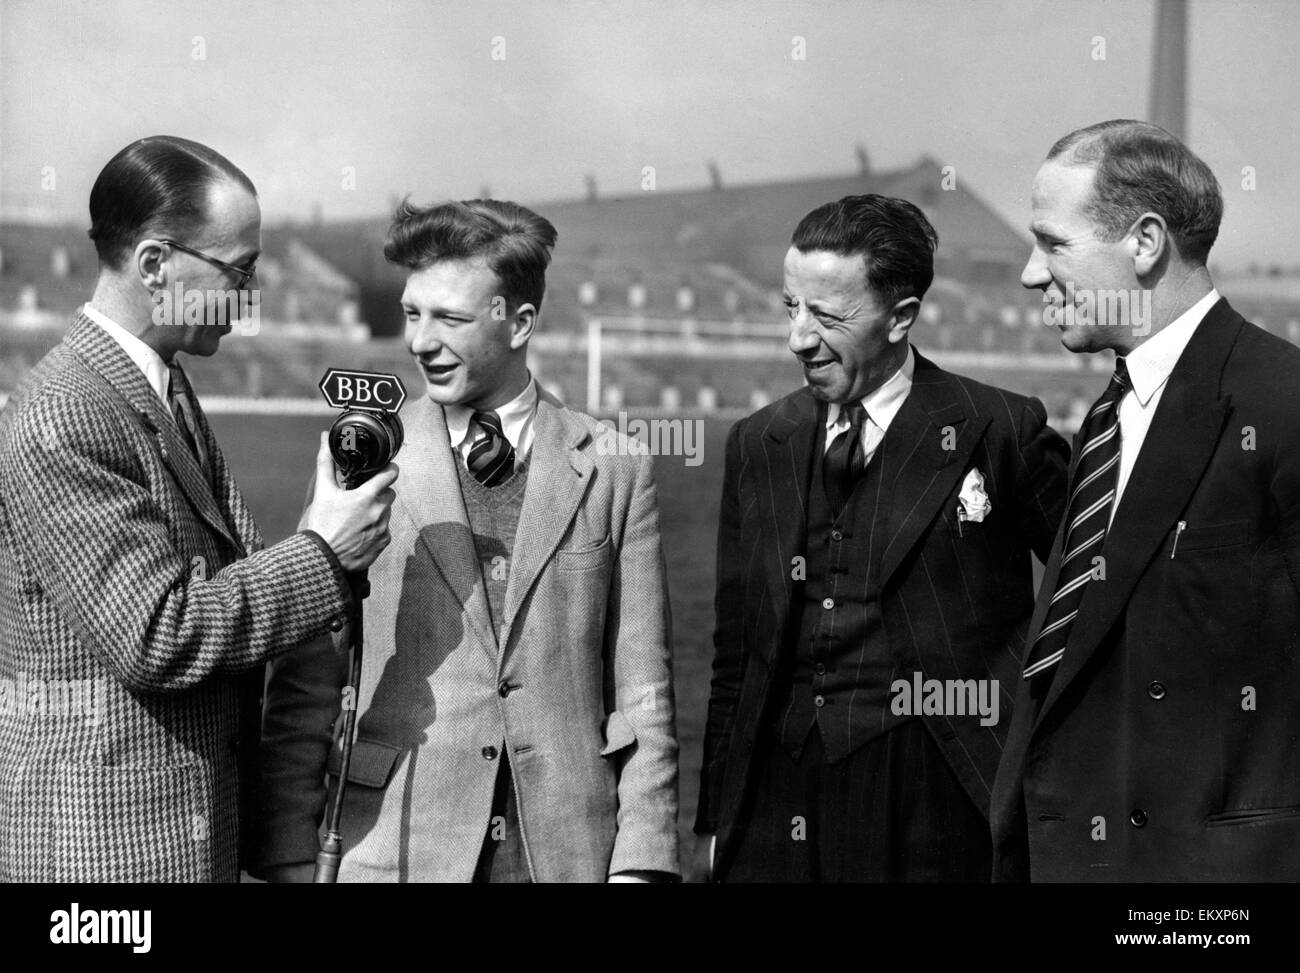 16 year old Jeff Whitefoot making a BBC recording at Old Trafford for Childrens Newsreel. 20th April 1950. Stock Photo